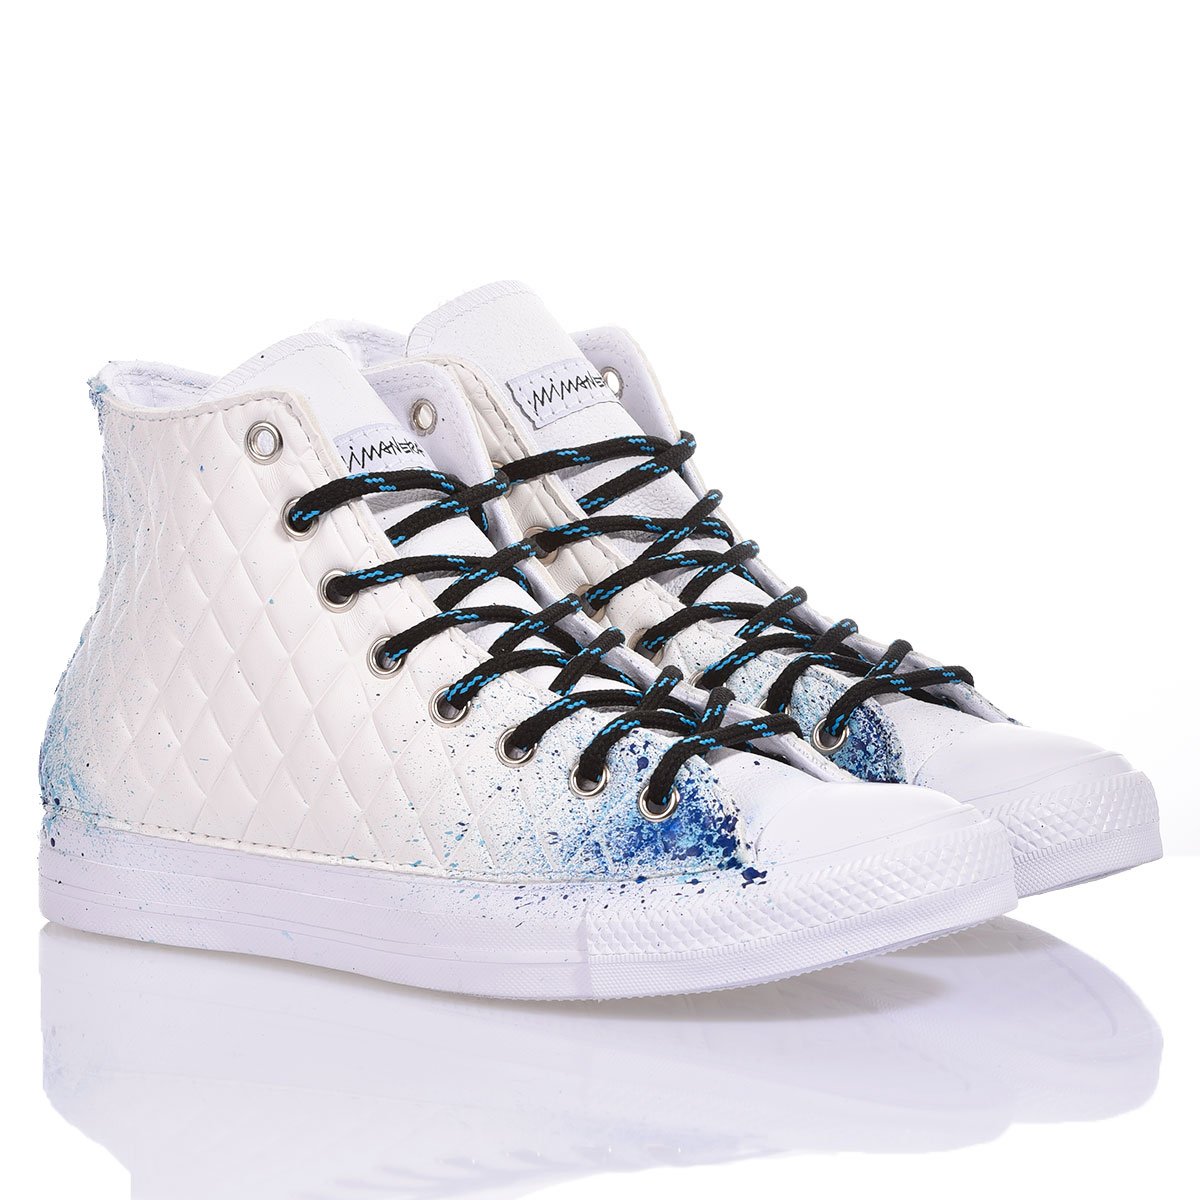 Converse White Quilt Chuck Taylor Hi Special